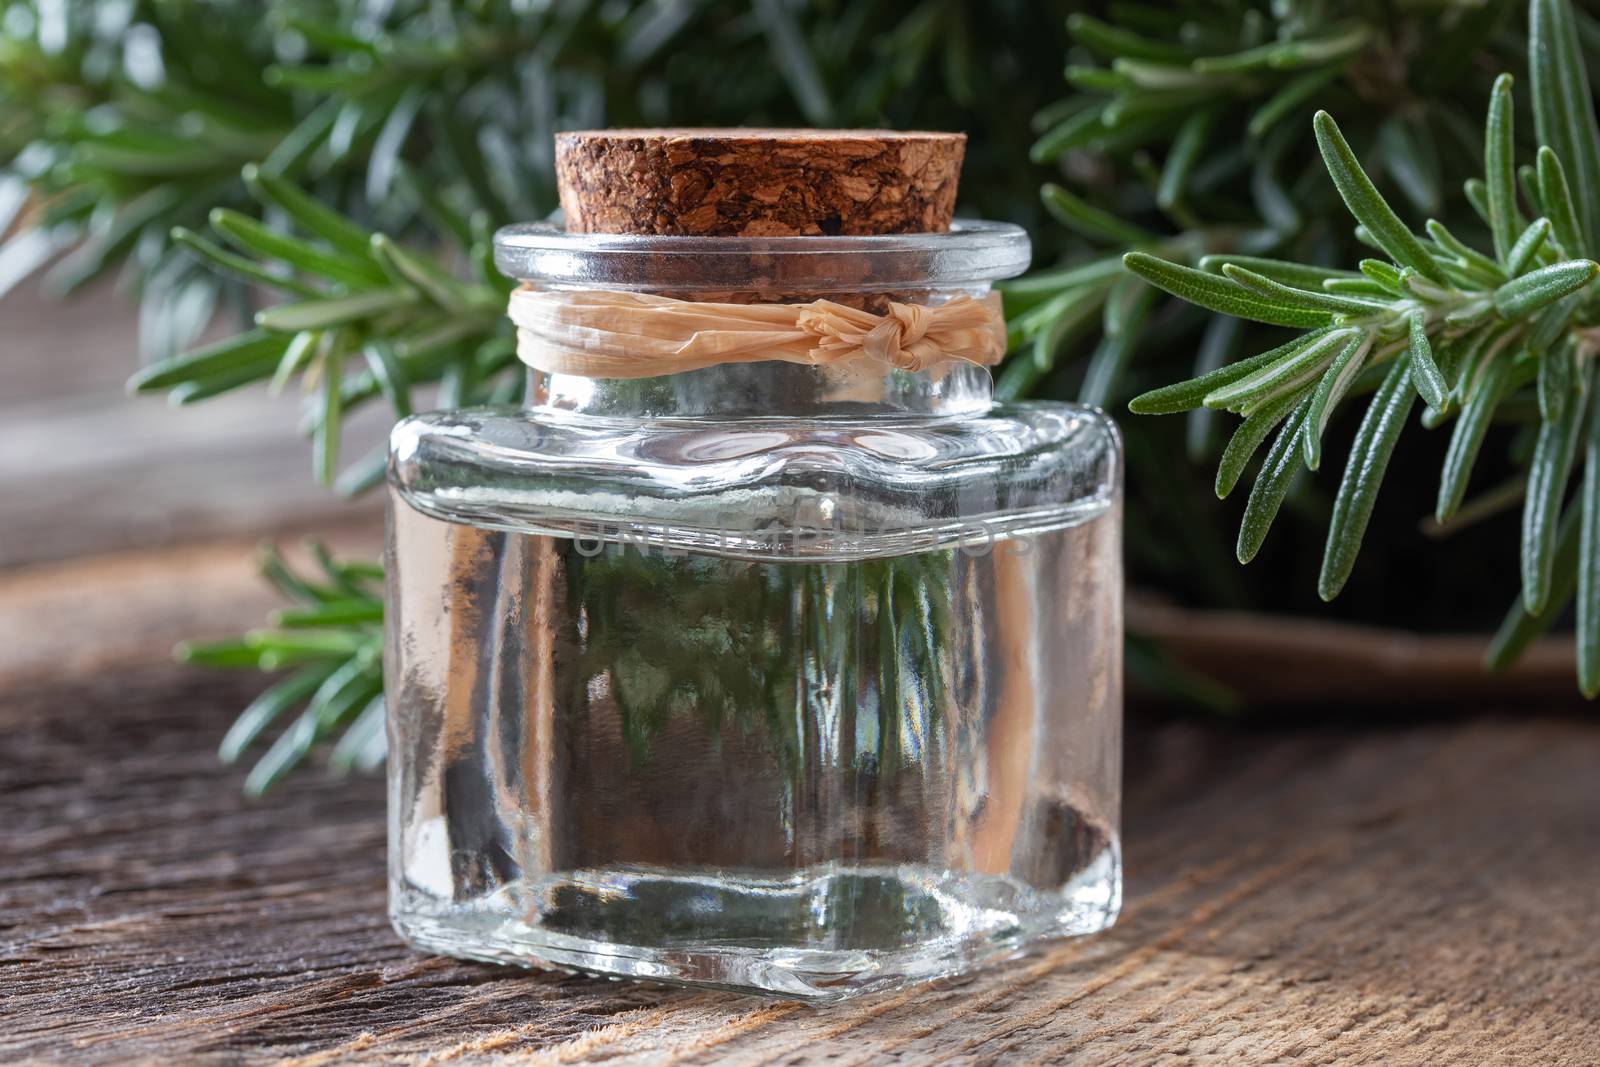 A bottle of rosemary essential oil with fresh rosemary by madeleine_steinbach